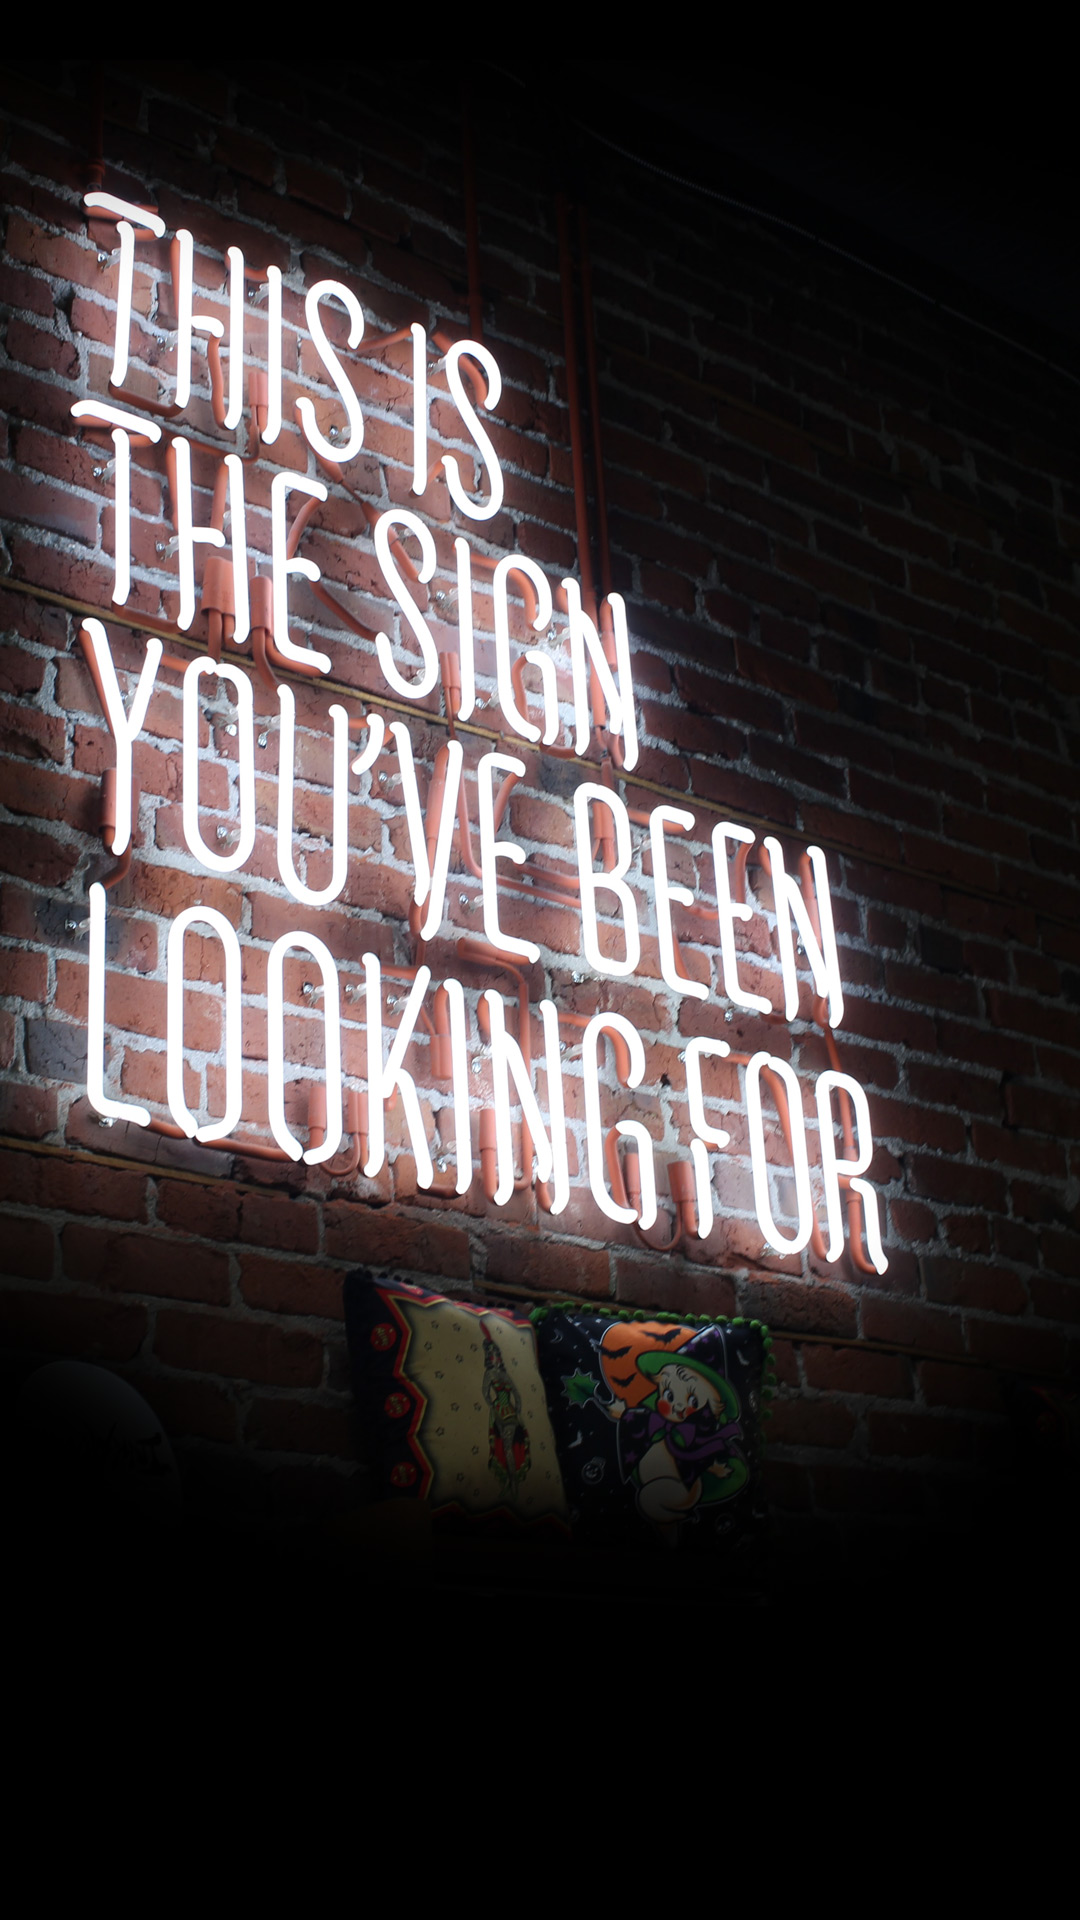 This is the sign you've been looking for in neon (Austin Chan at unsplash.com)